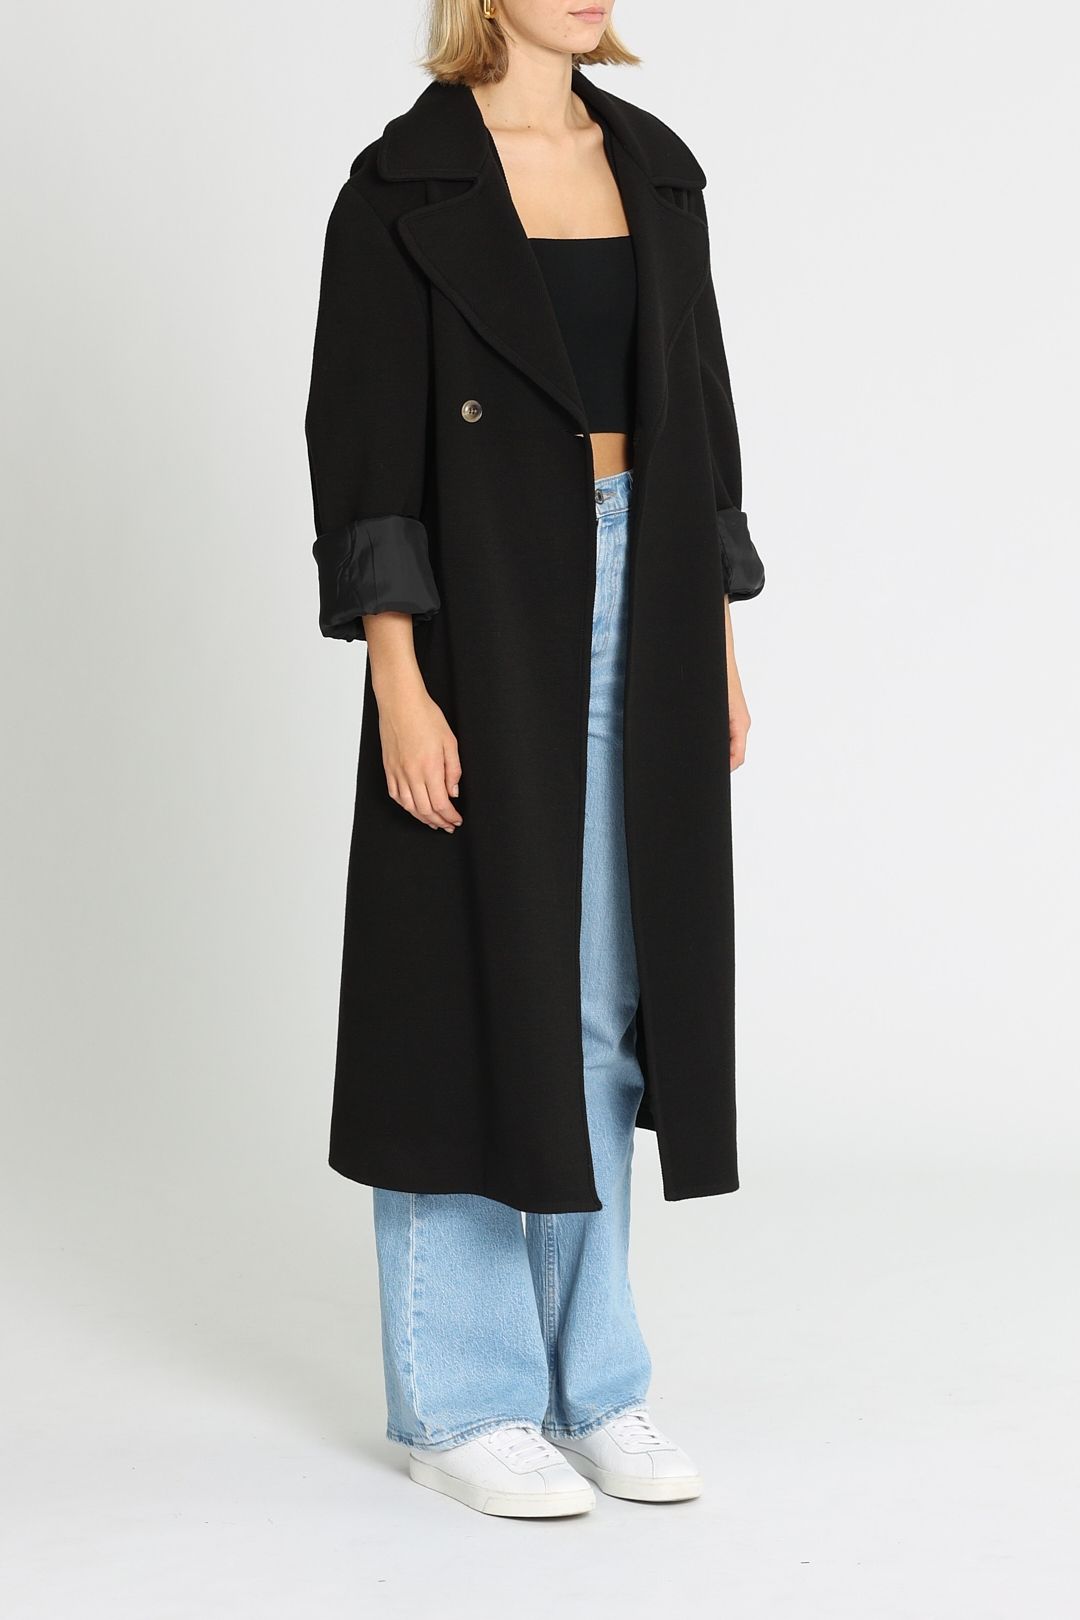 Bassike Twill Trench Coat Black Button Closure